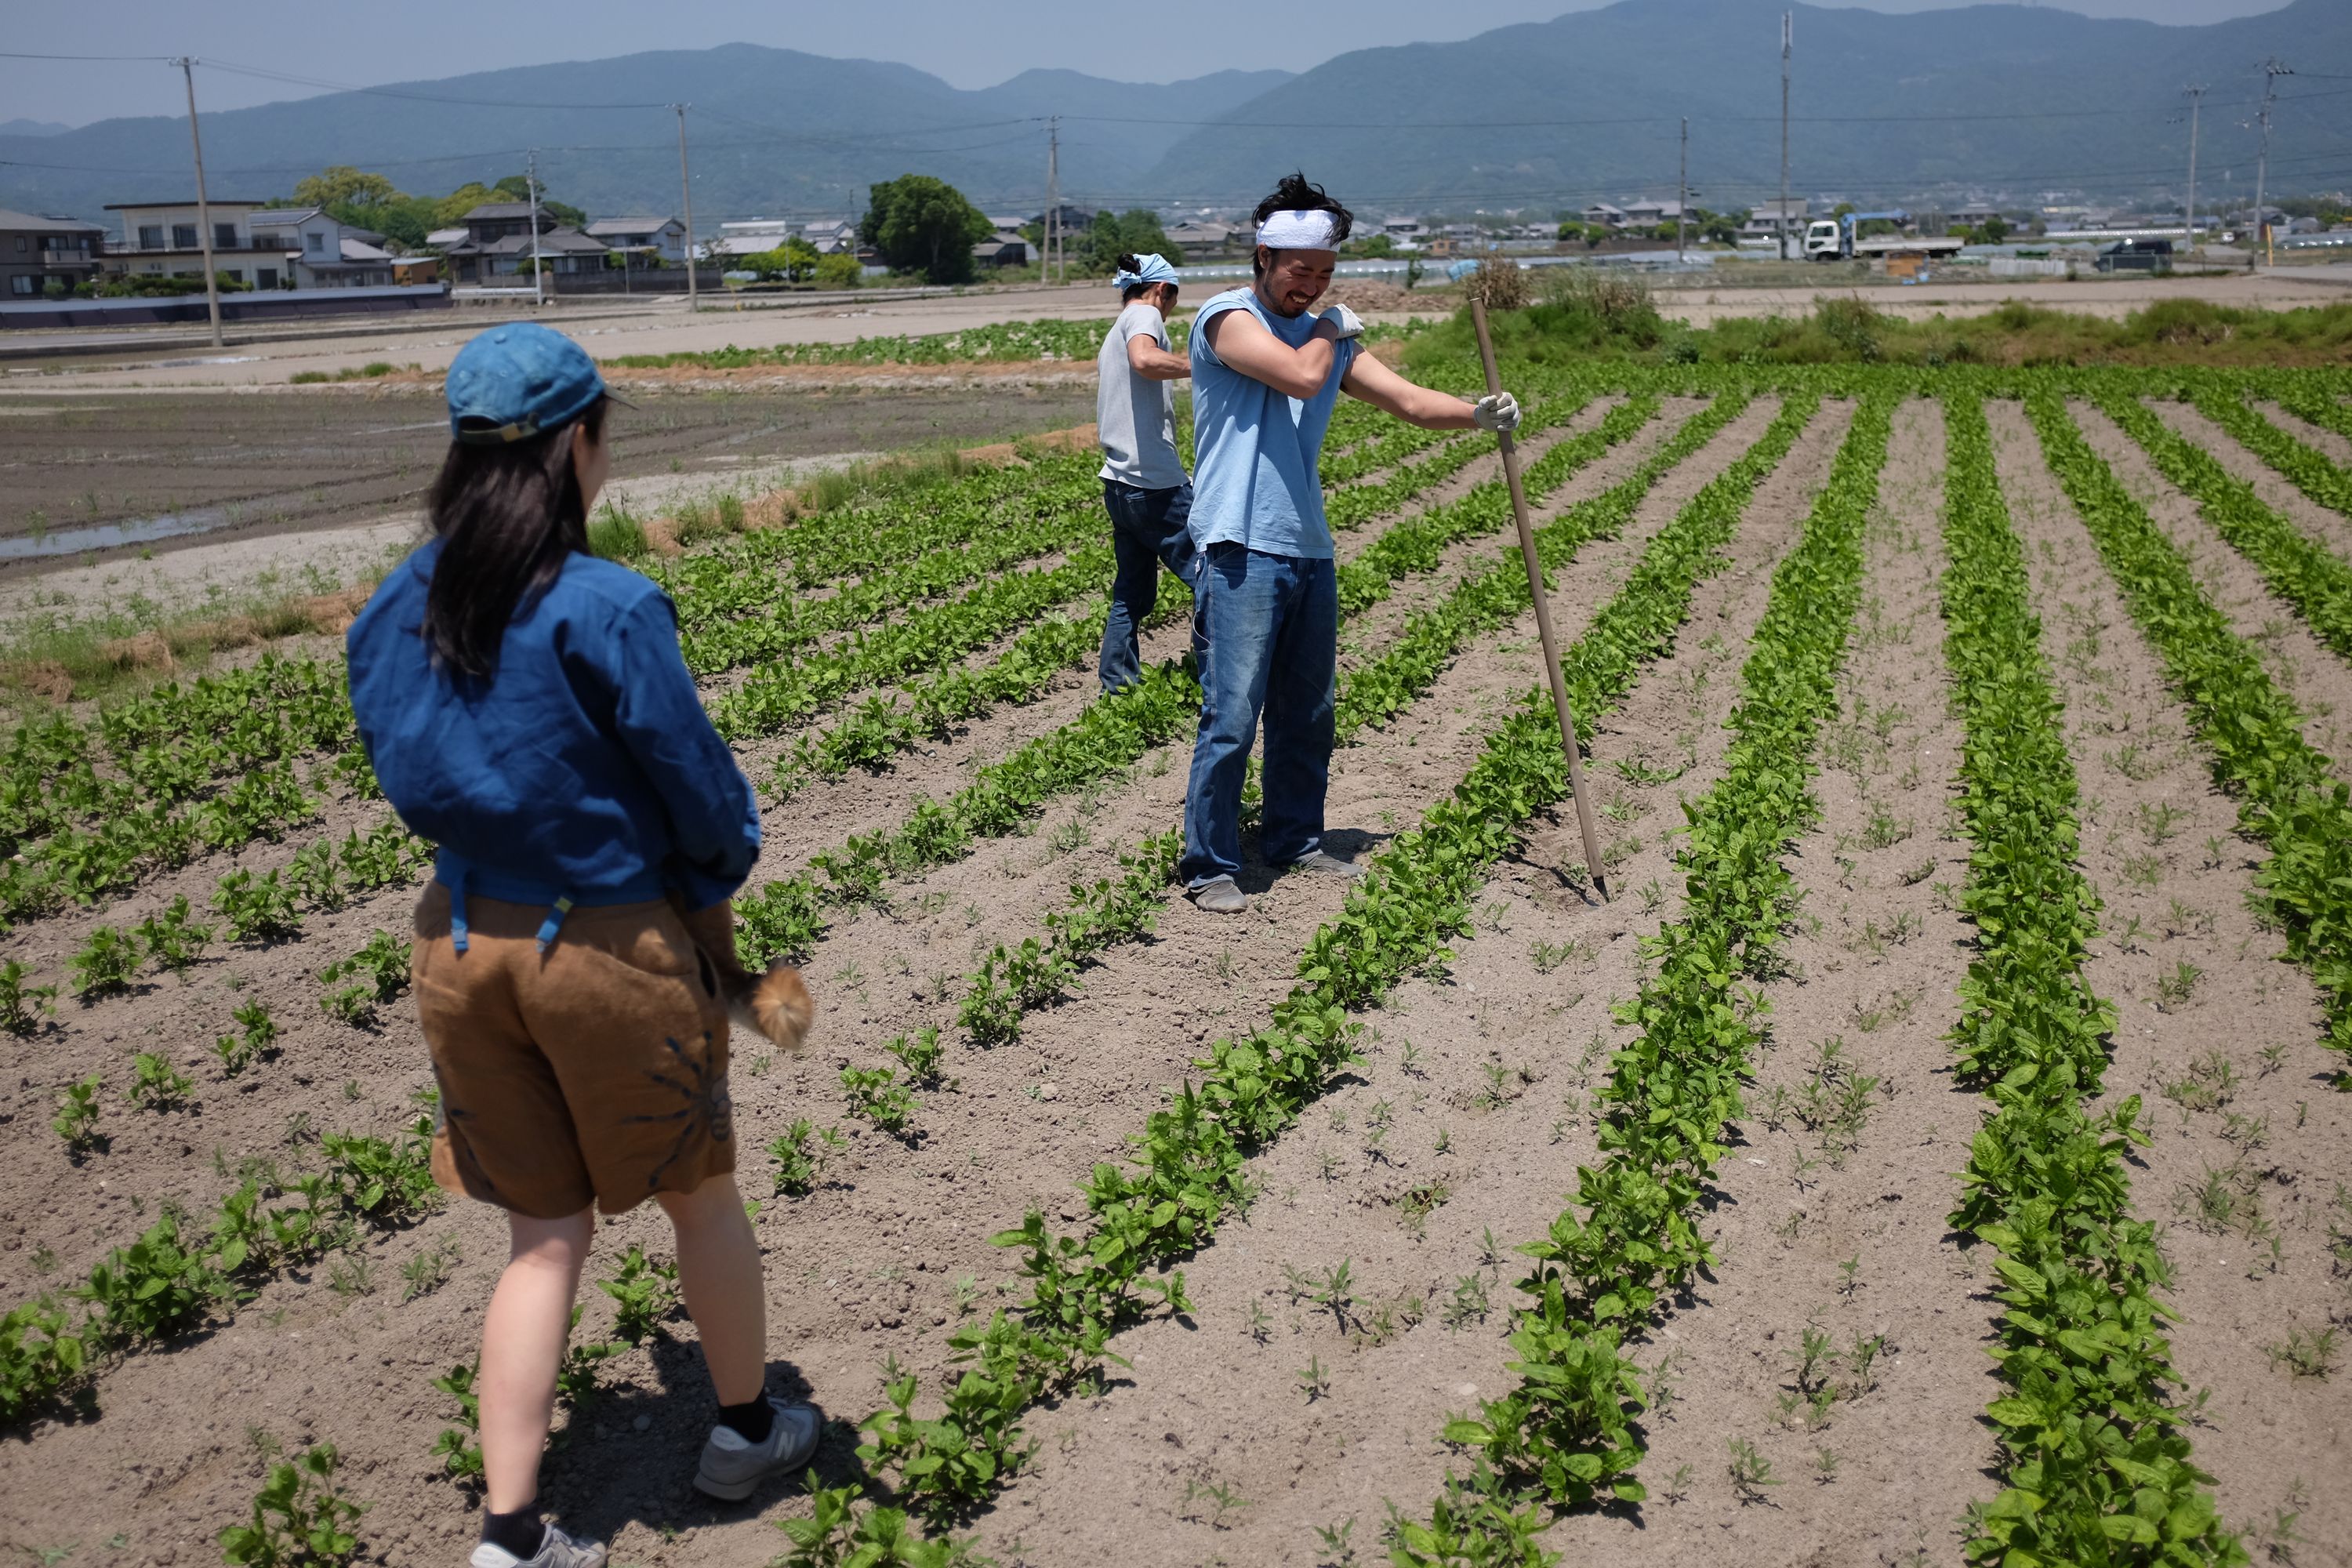 A Japanese woman, Nishimoto Kyōko, and two men, dressed in indigo-colored clothes, work an indigo farm in the sun.